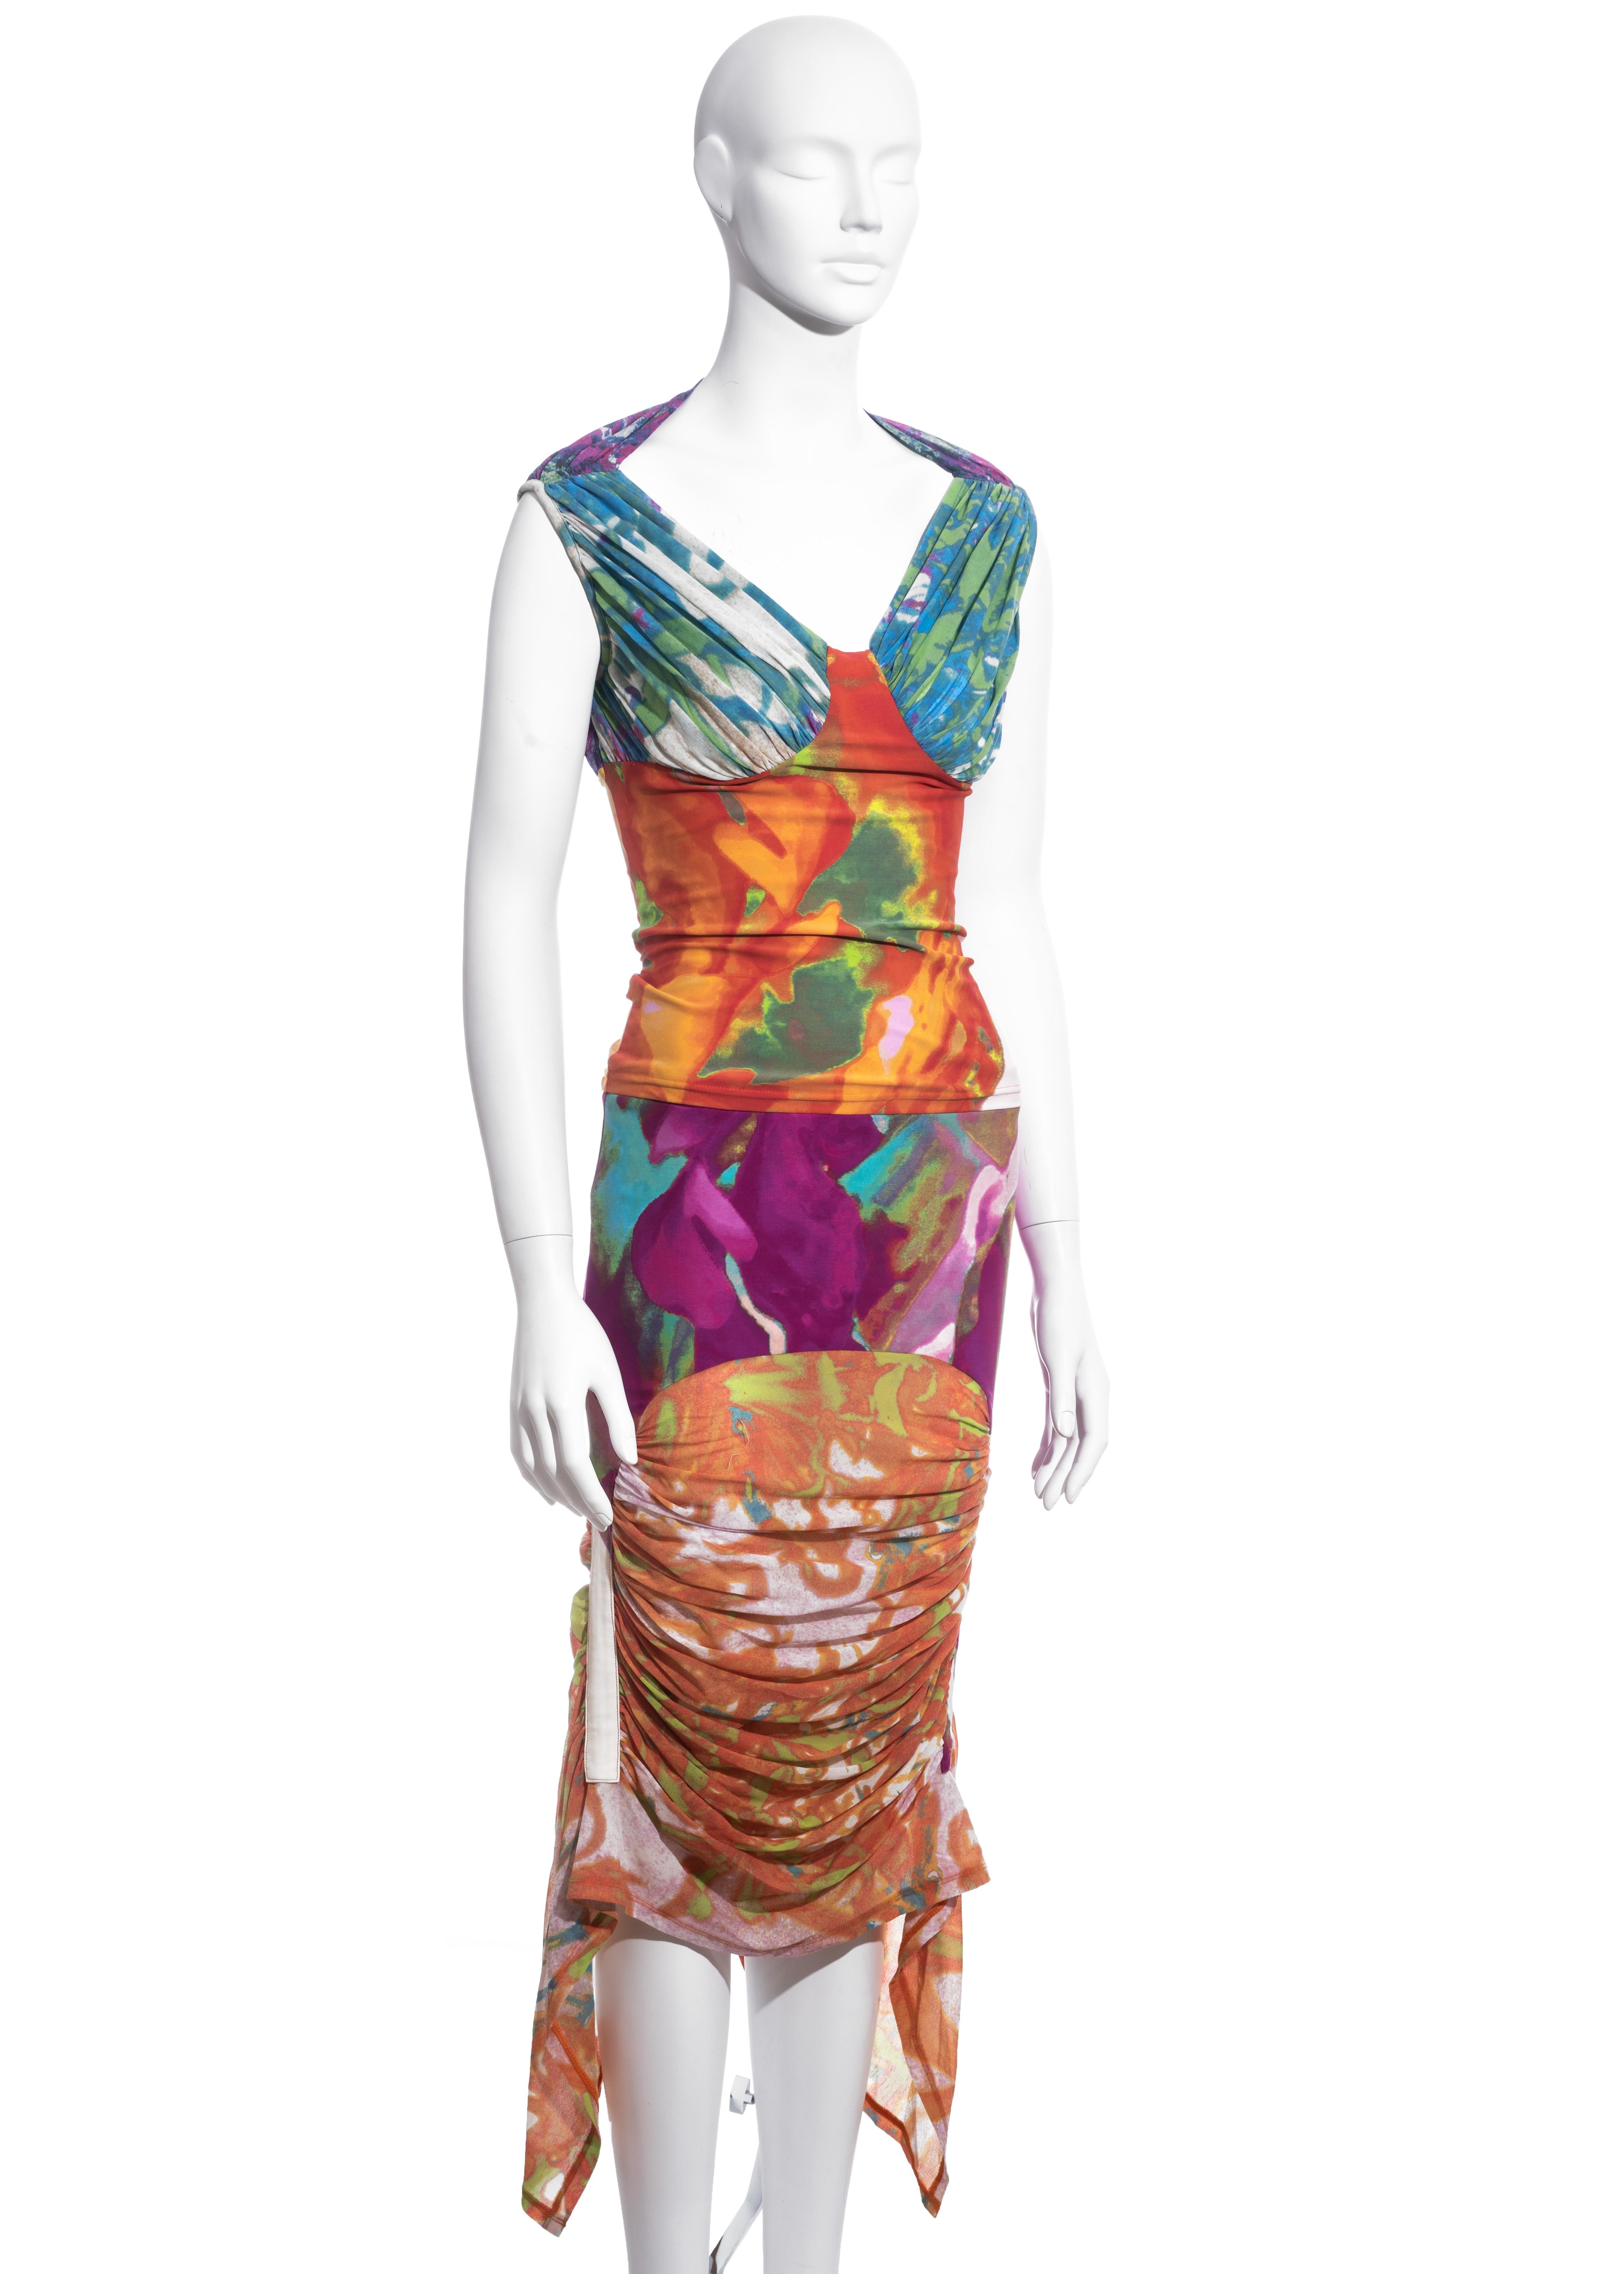 ▪ Issey Miyake multicoloured mesh and lycra skirt and top set
▪ Vest with ruched back and bust panels
▪ Mid-length skirt with ruched seams and handkerchief hemline
▪ JP 3 / EU + US Medium
▪ Spring-Summer 2002